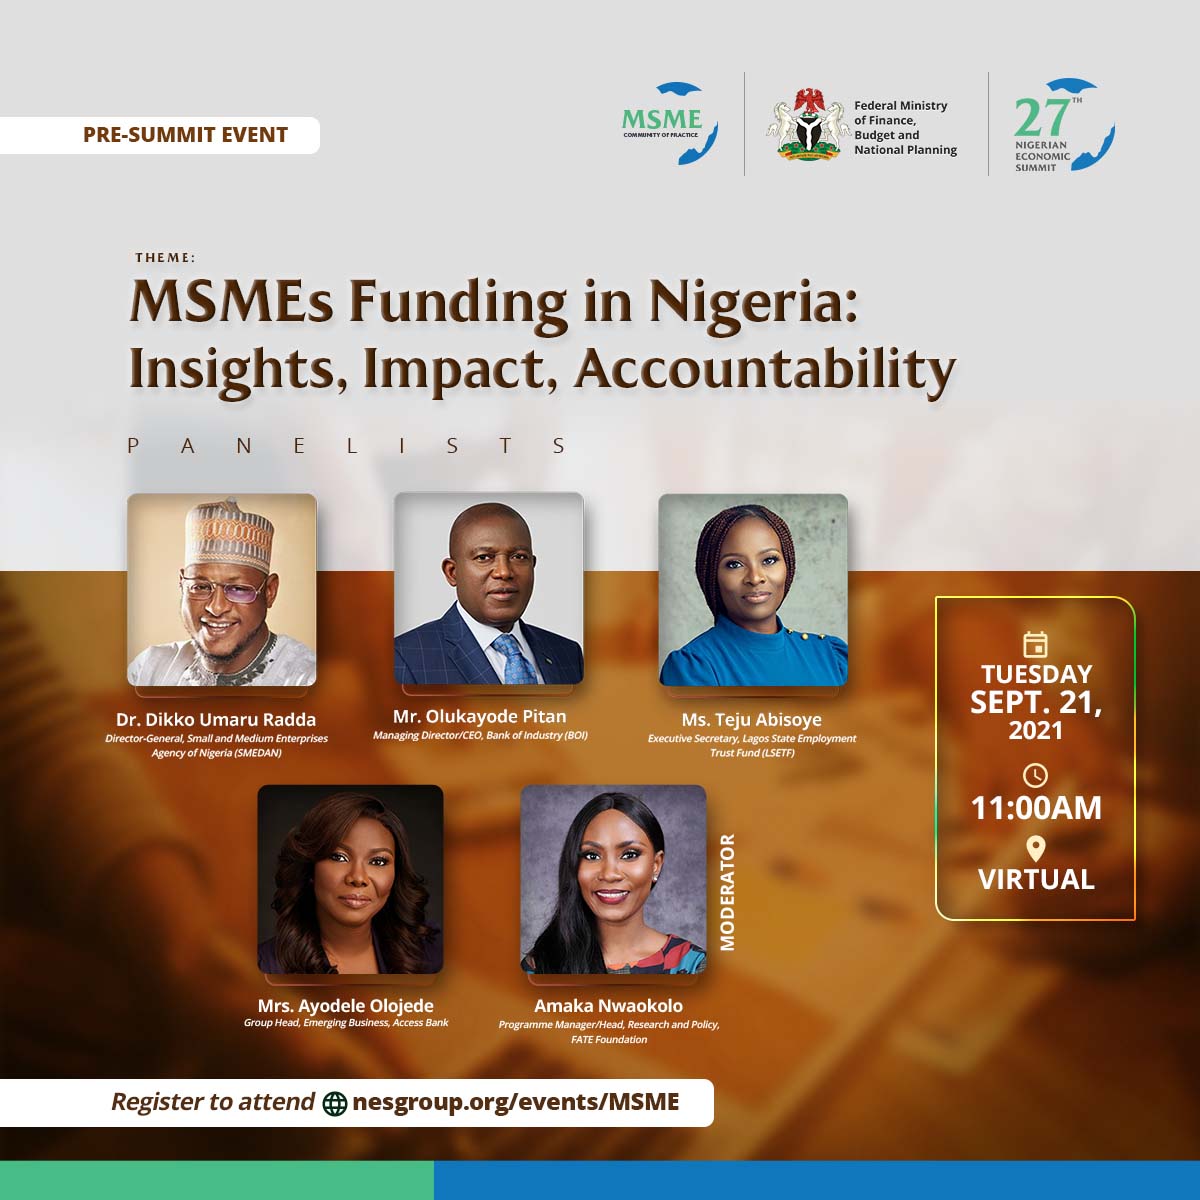 MSME Funding in Nigeria: Insights, Impact, Accountability, The Nigerian Economic Summit Group, The NESG, think-tank, think, tank, nigeria, policy, nesg, africa, number one think in africa, best think in nigeria, the best think tank in africa, top 10 think tanks in nigeria, think tank nigeria, economy, business, PPD, public, private, dialogue, Nigeria, Nigeria PPD, NIGERIA, PPD